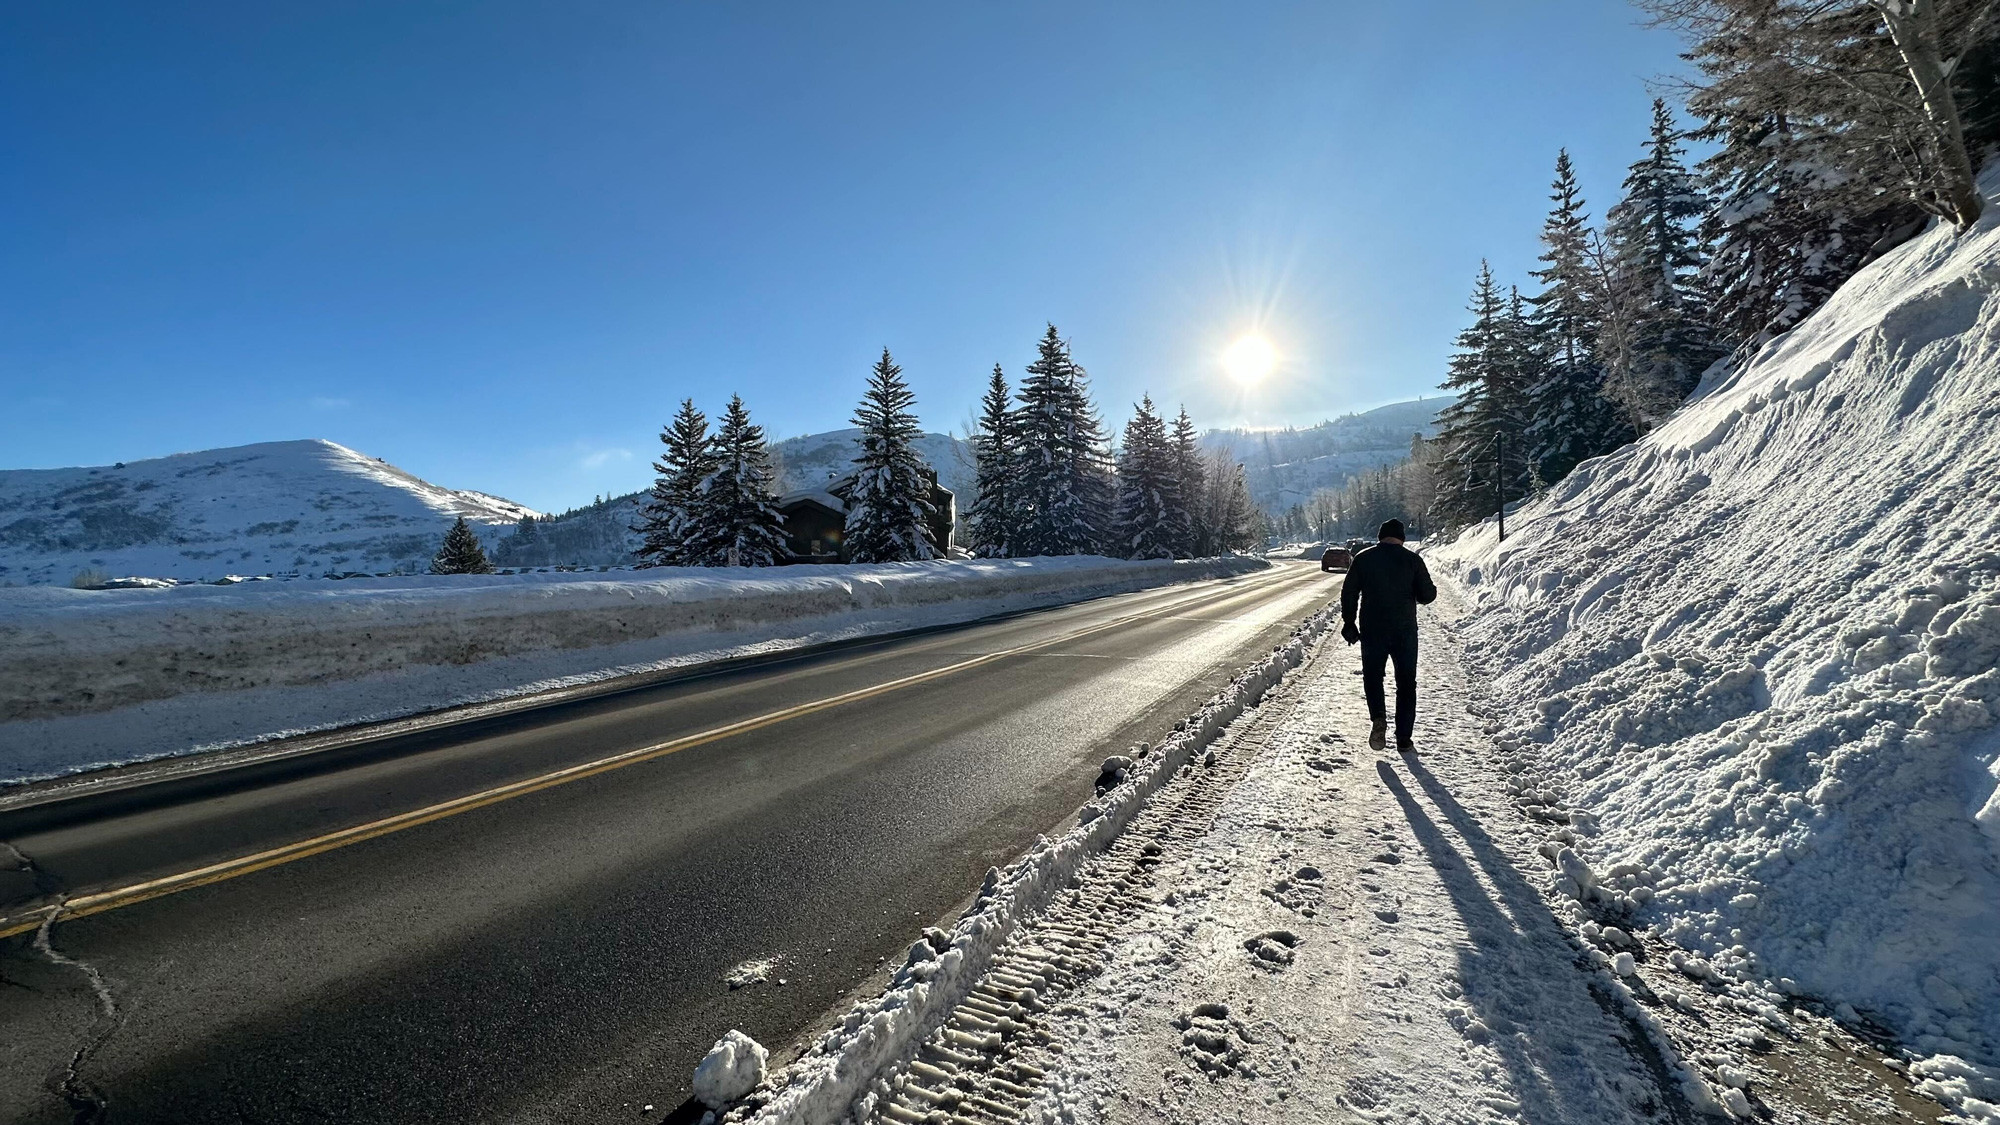 A person walking down a snow-covered road